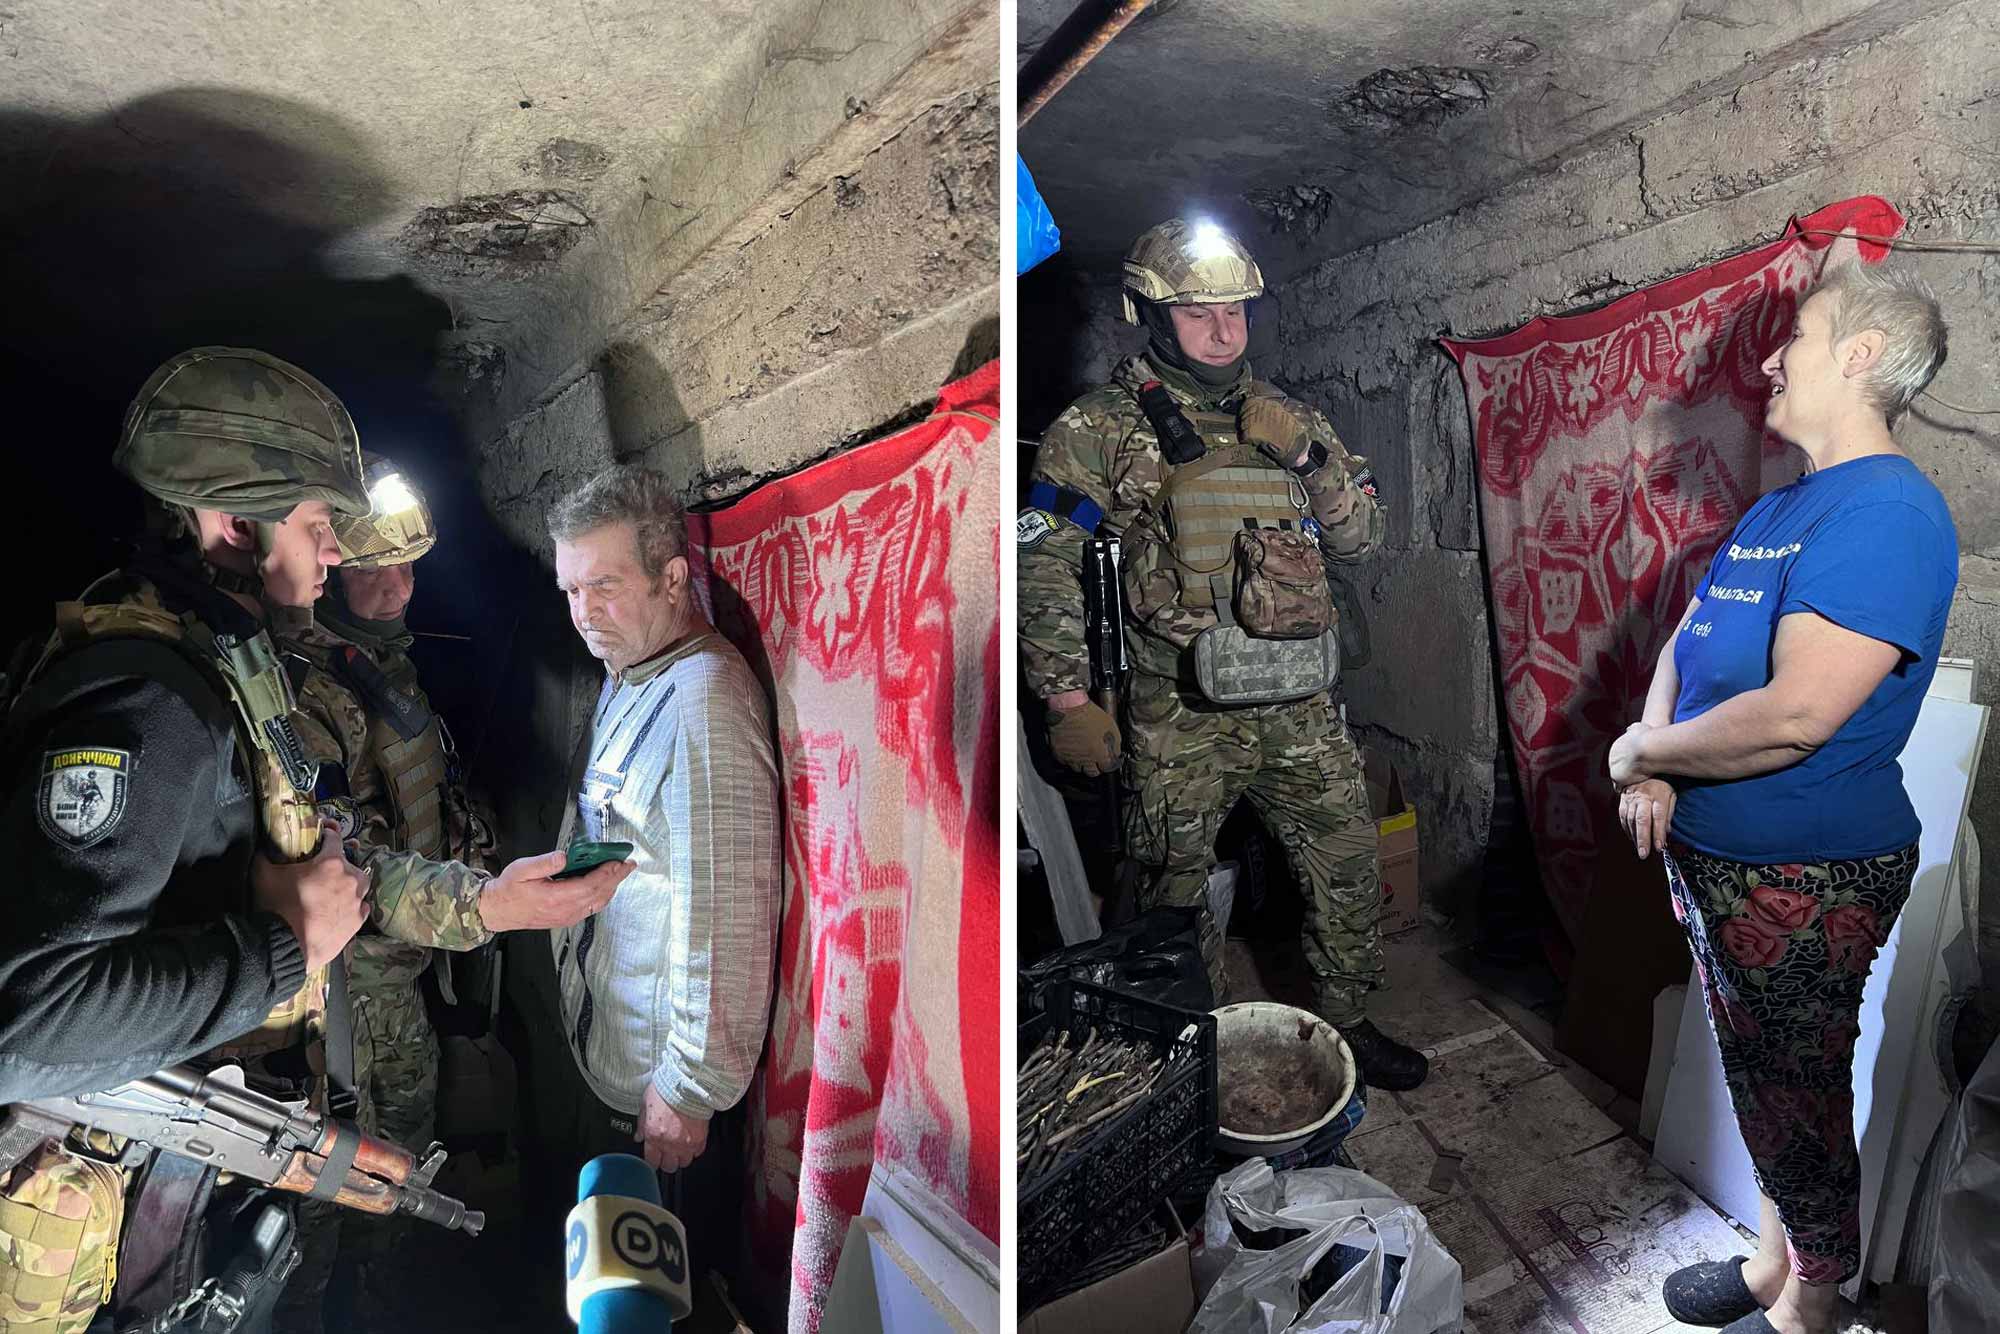 (L) Member of the of White Angel crew trying to persuade a local resident Valeriy Oleynikov to evacuate. (R) Iryna, a local resident who refuses to leave Avdiivka and lives in a basement with her son, cats and dogs. © O. Golovina